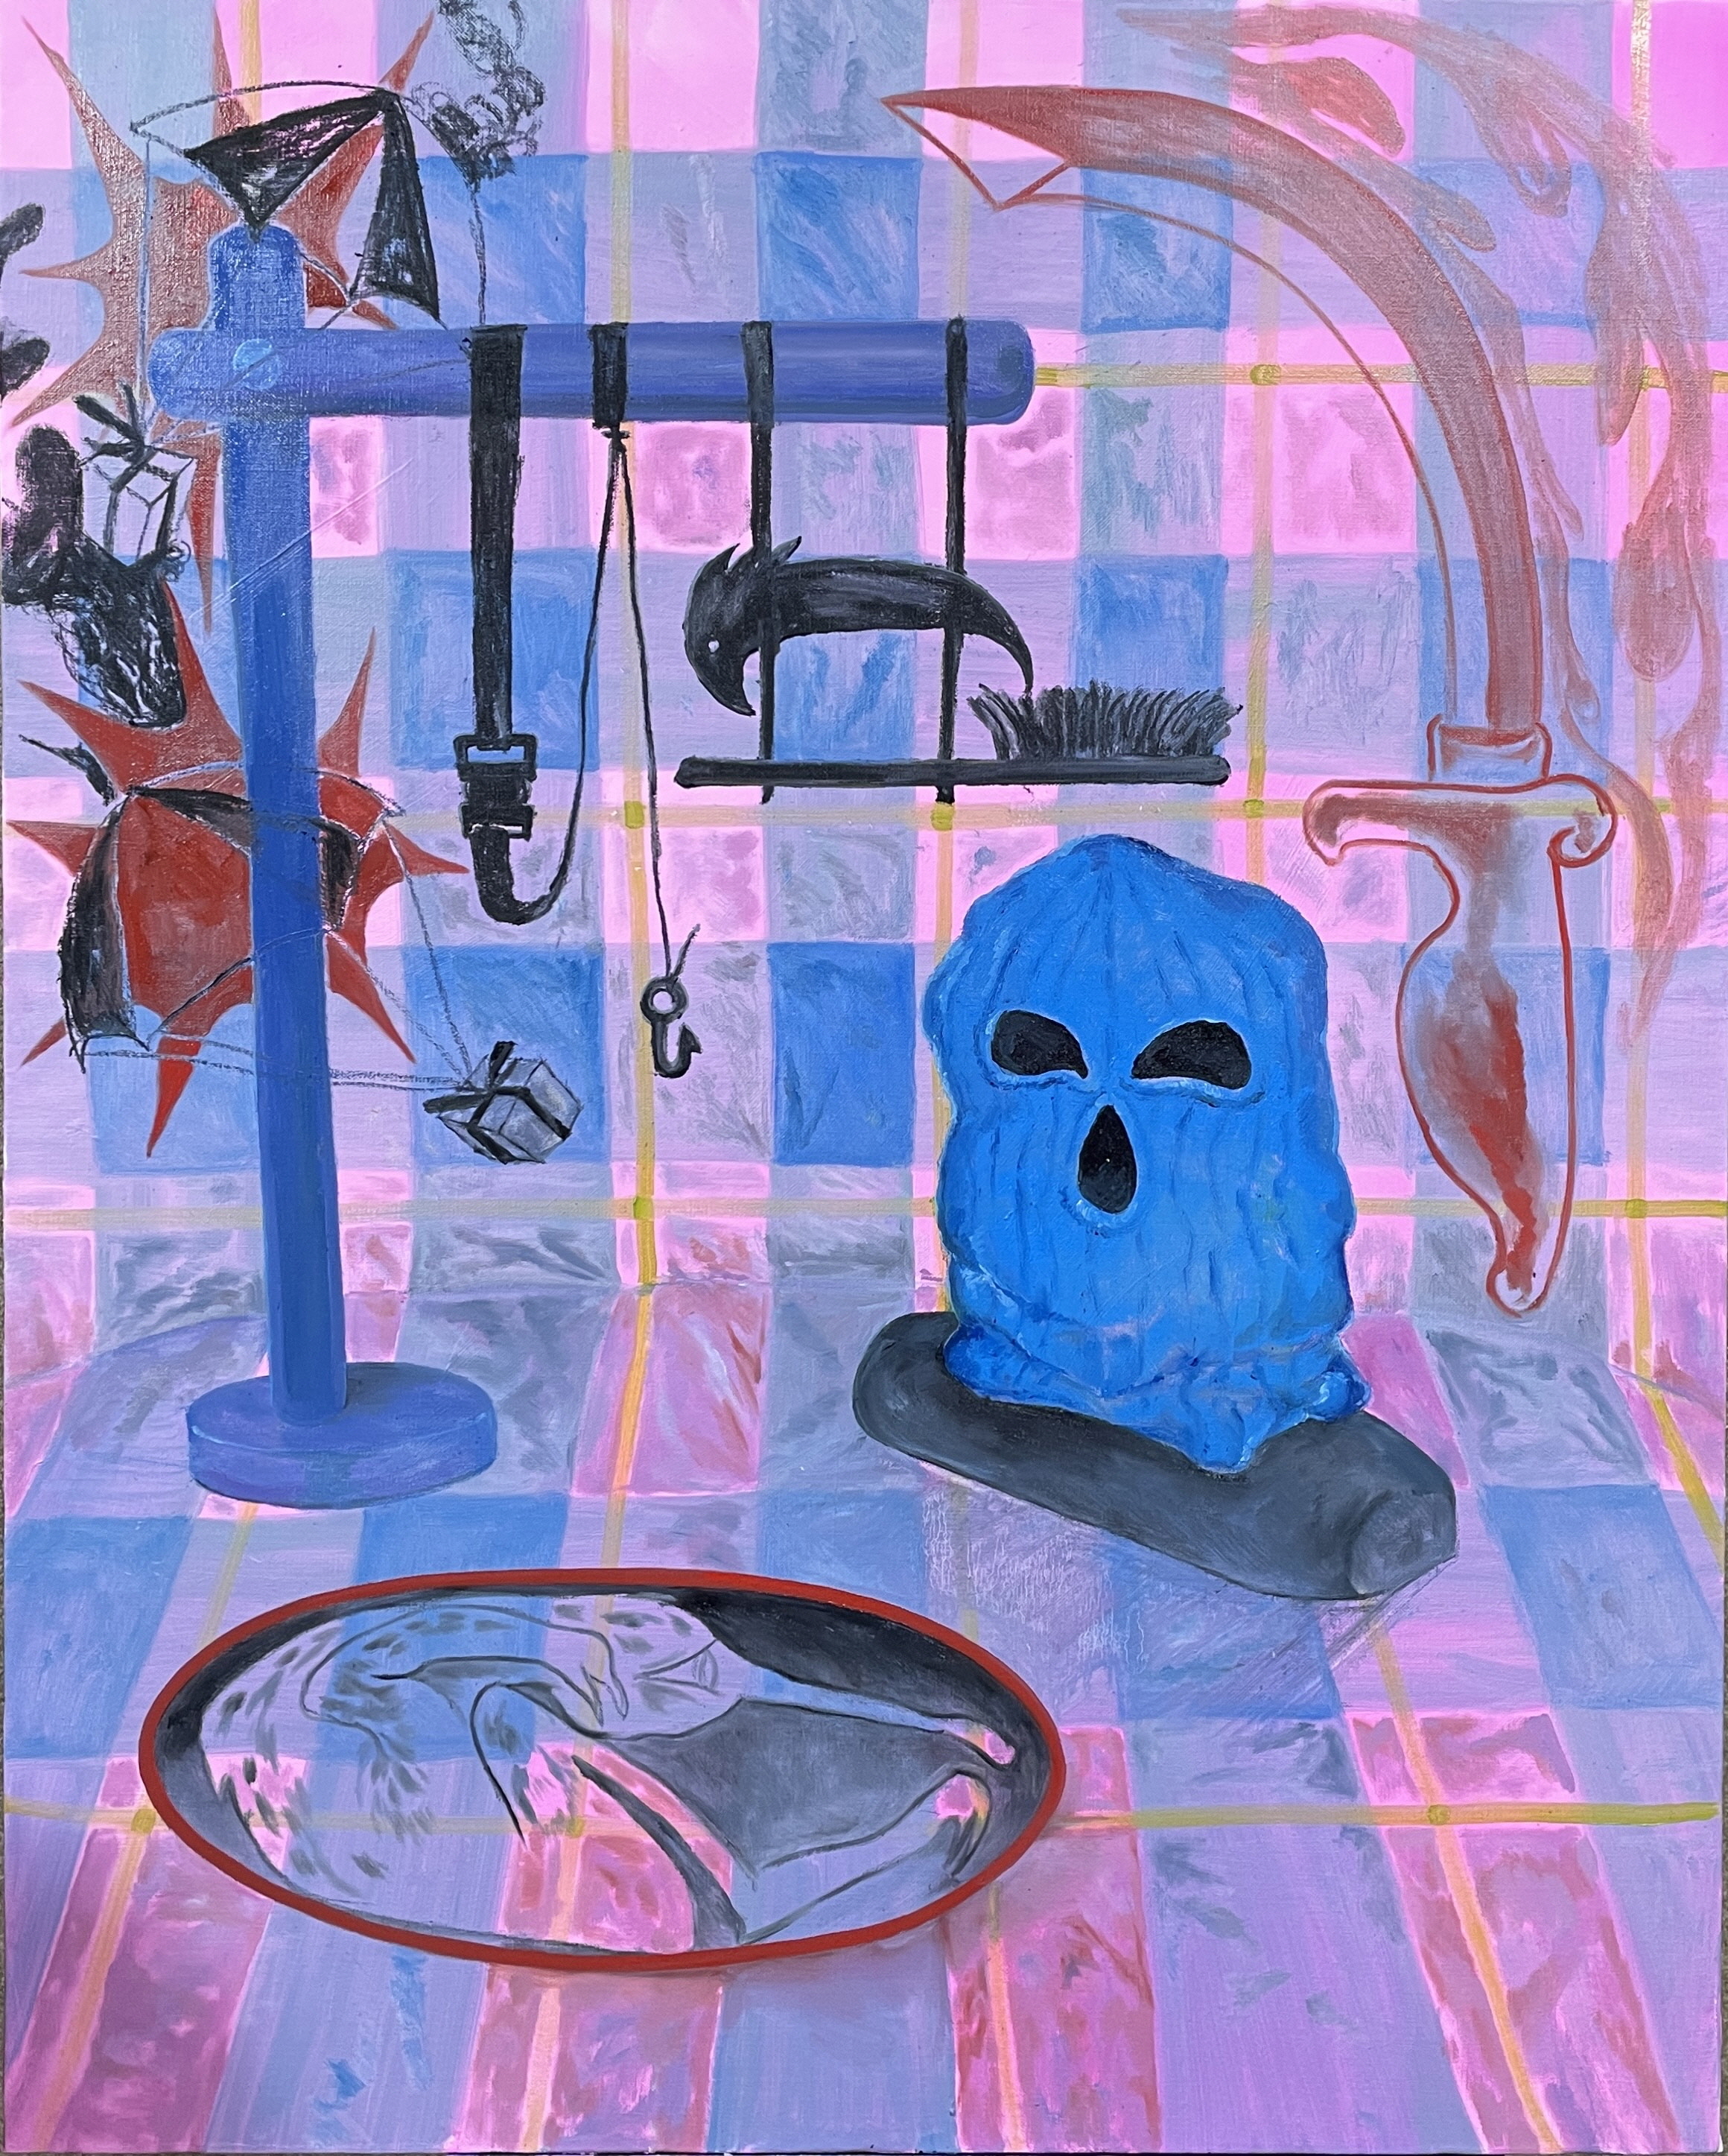 Still Life(Blue Mask and Egg), Oil and Charcoal on Canvas, 91x72.7cm, 2021